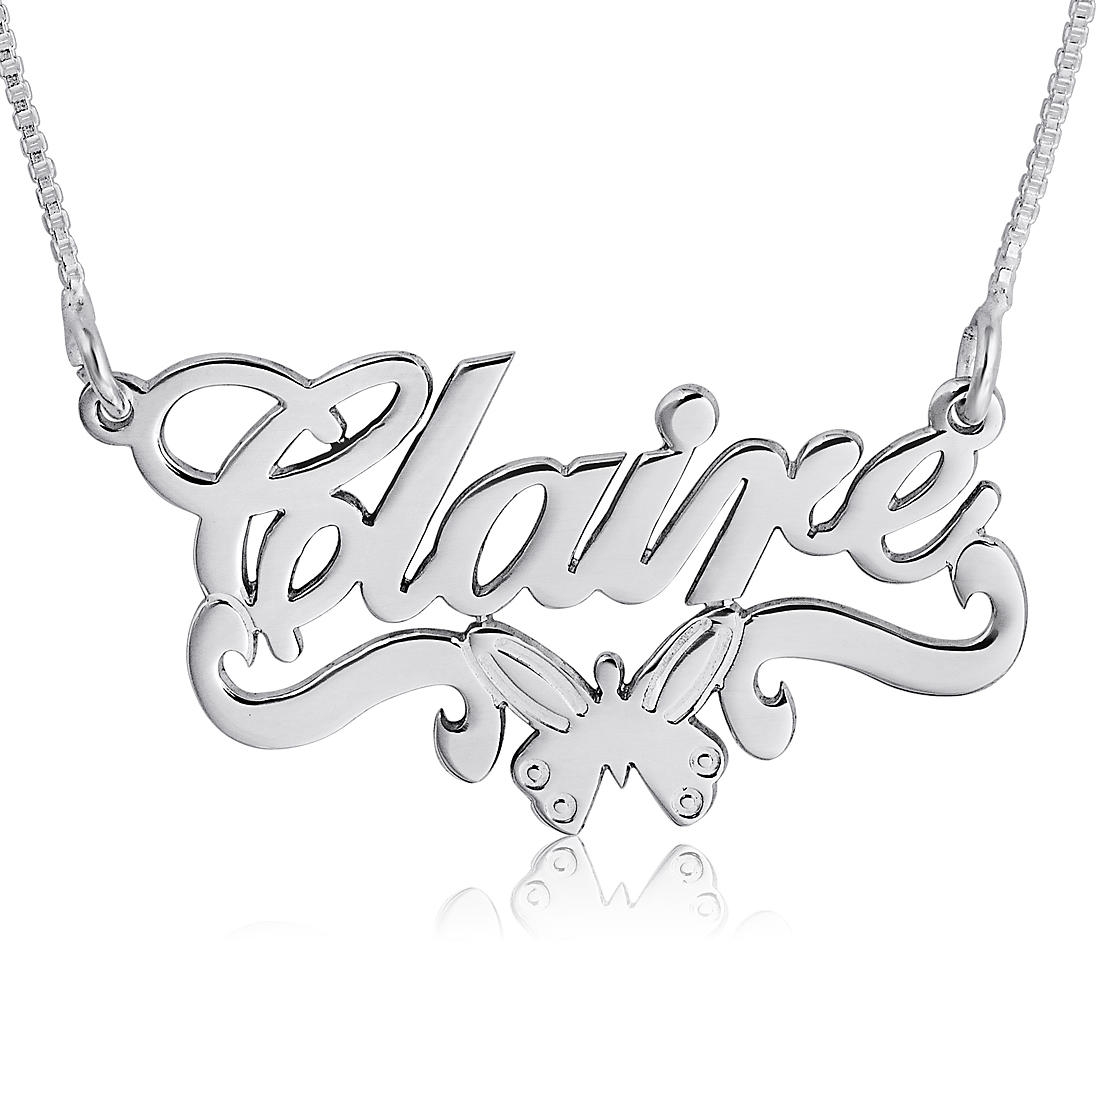 Butterfly Name Necklace, Sterling Silver with Swooshes - 1